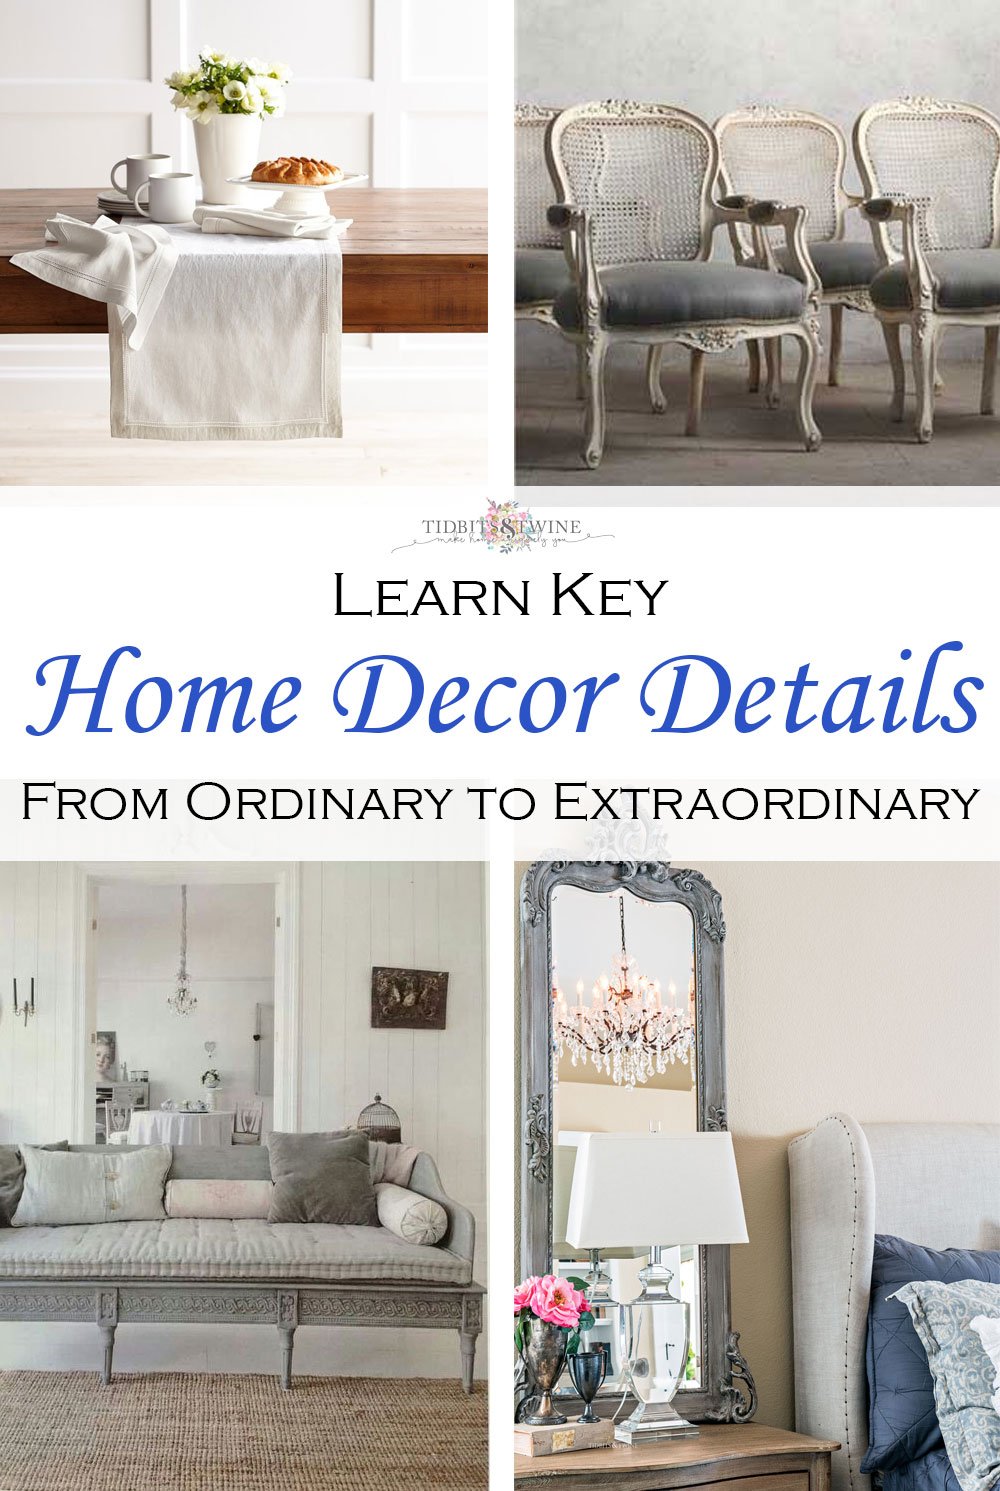 Home Decor Details – From Ordinary to Extraordinary!